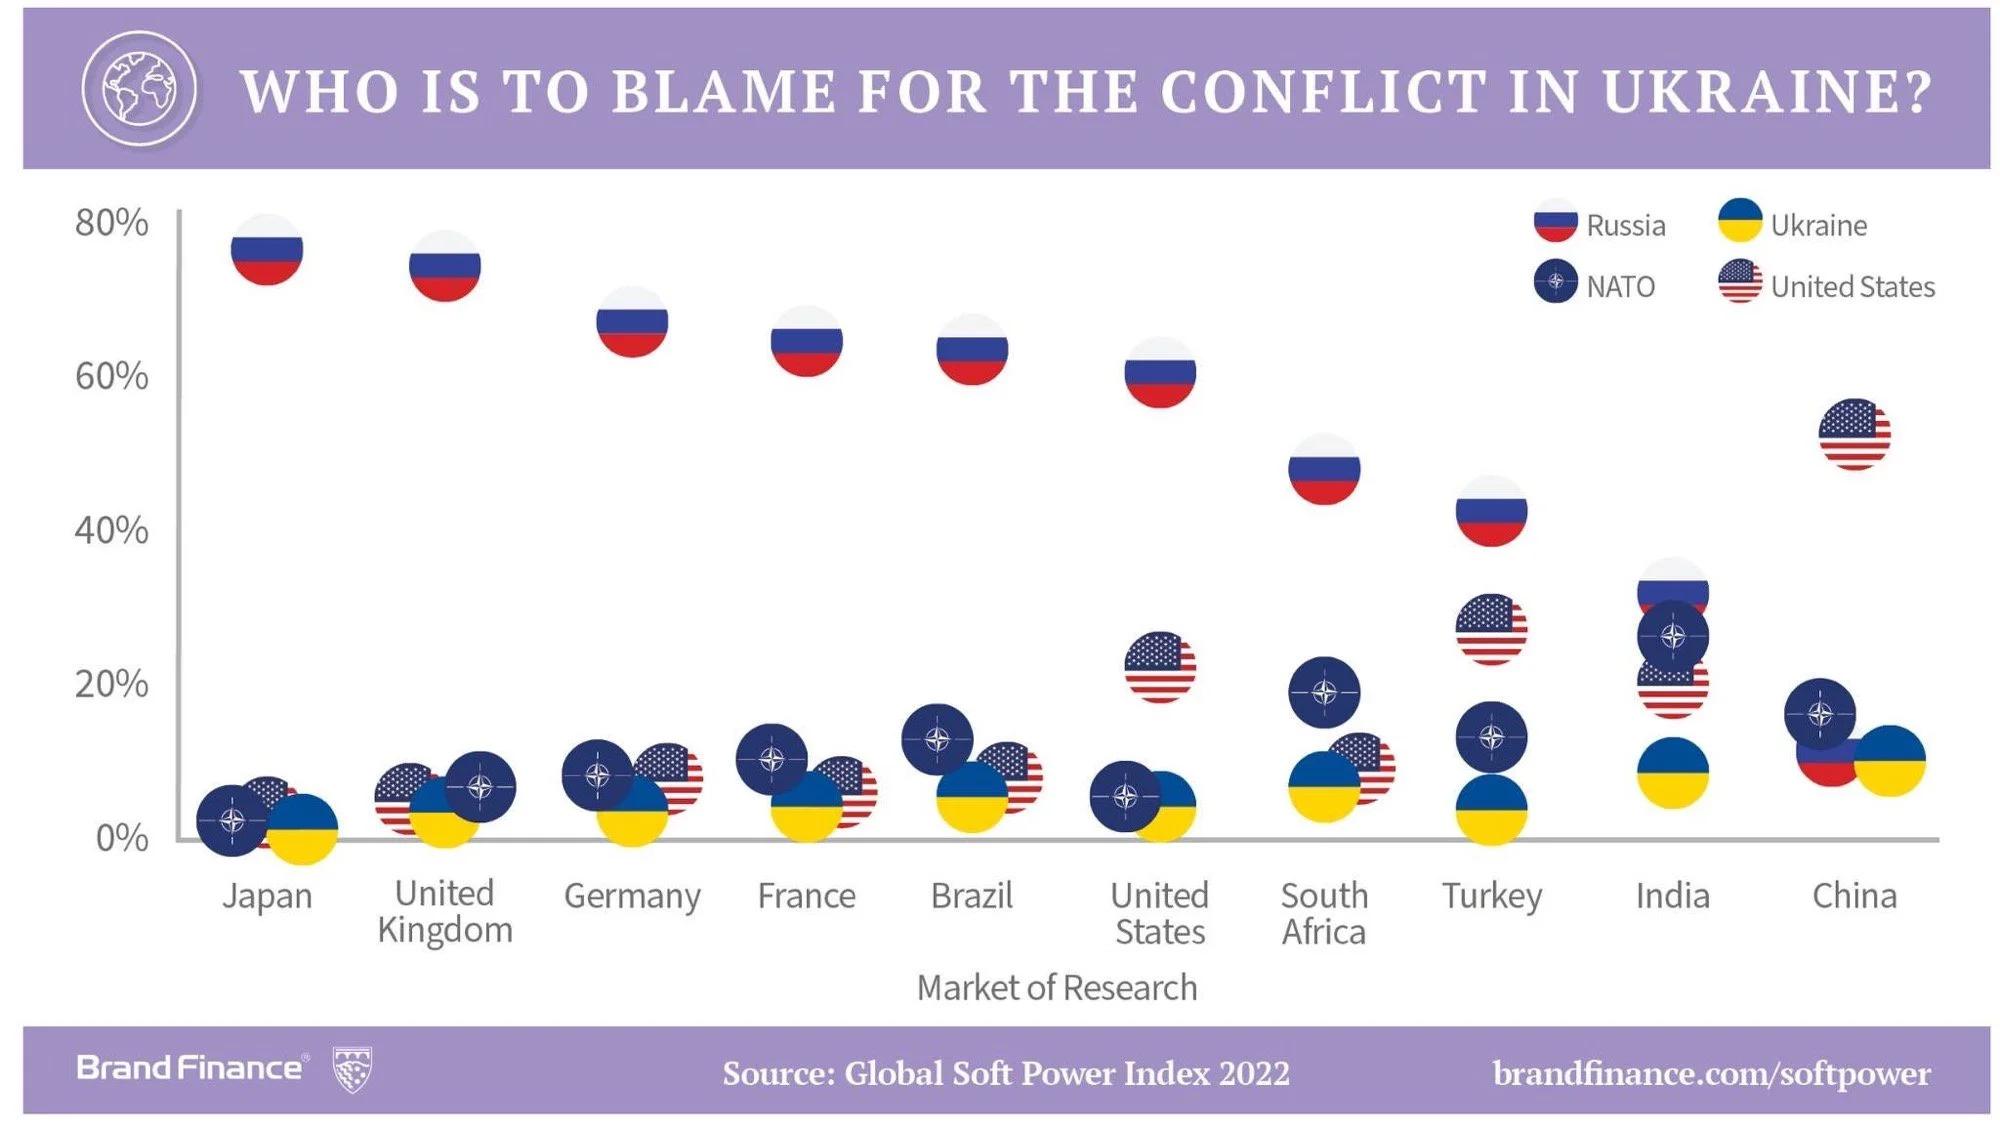 fascinating photos - blame for the conflict in ukra - 69 Who Is To Blame For The Conflict In Ukraine? 80% Russia Ukraine Nato United States 60% 40% 20% 0% Japan Germany France United Kingdom India Turkey China Brazil United States Market of Research South